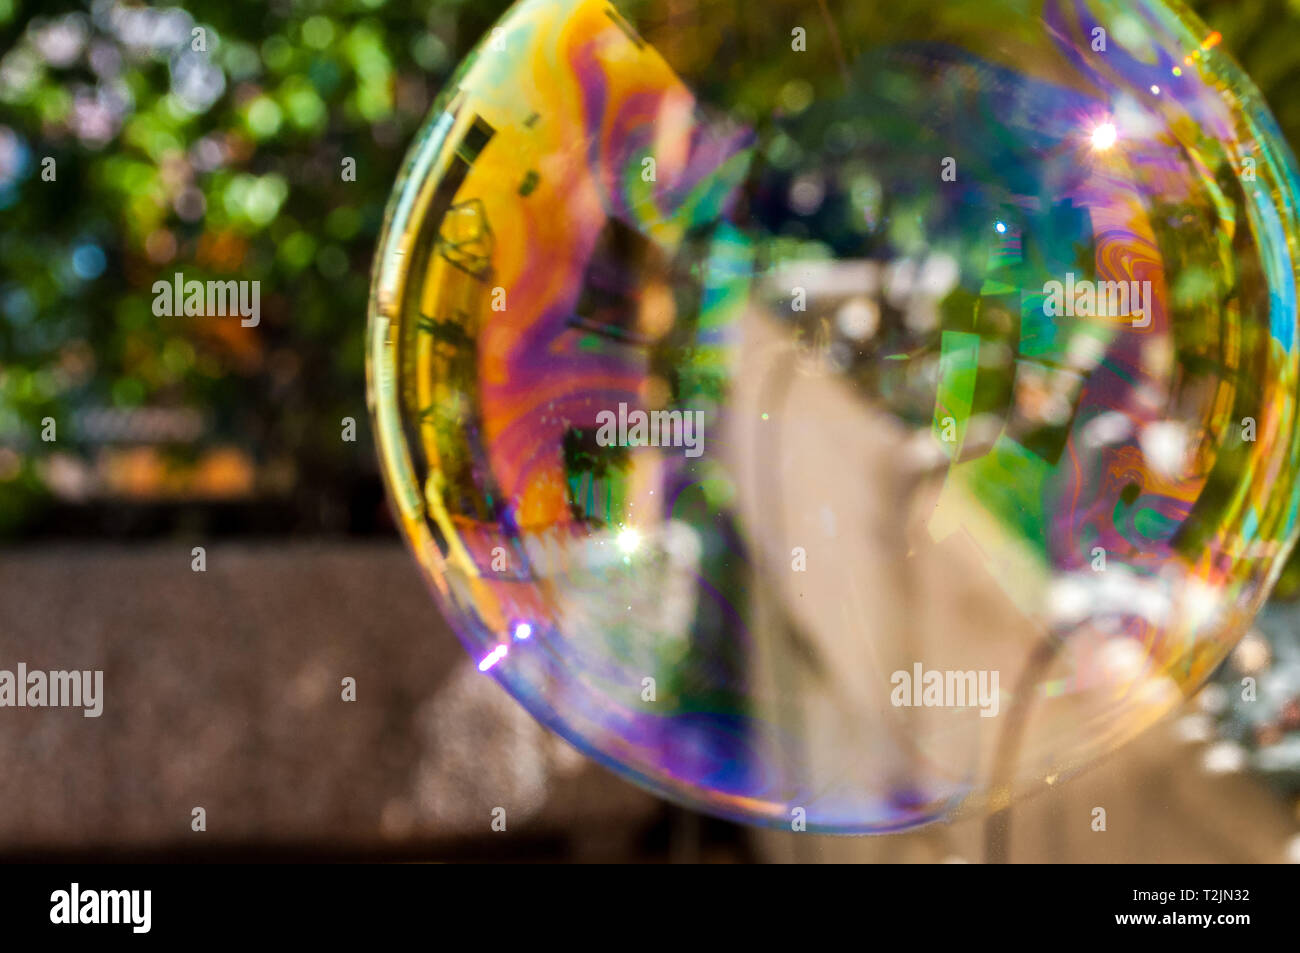 kids big rainbow colored soap bubble floating in garden Stock Photo